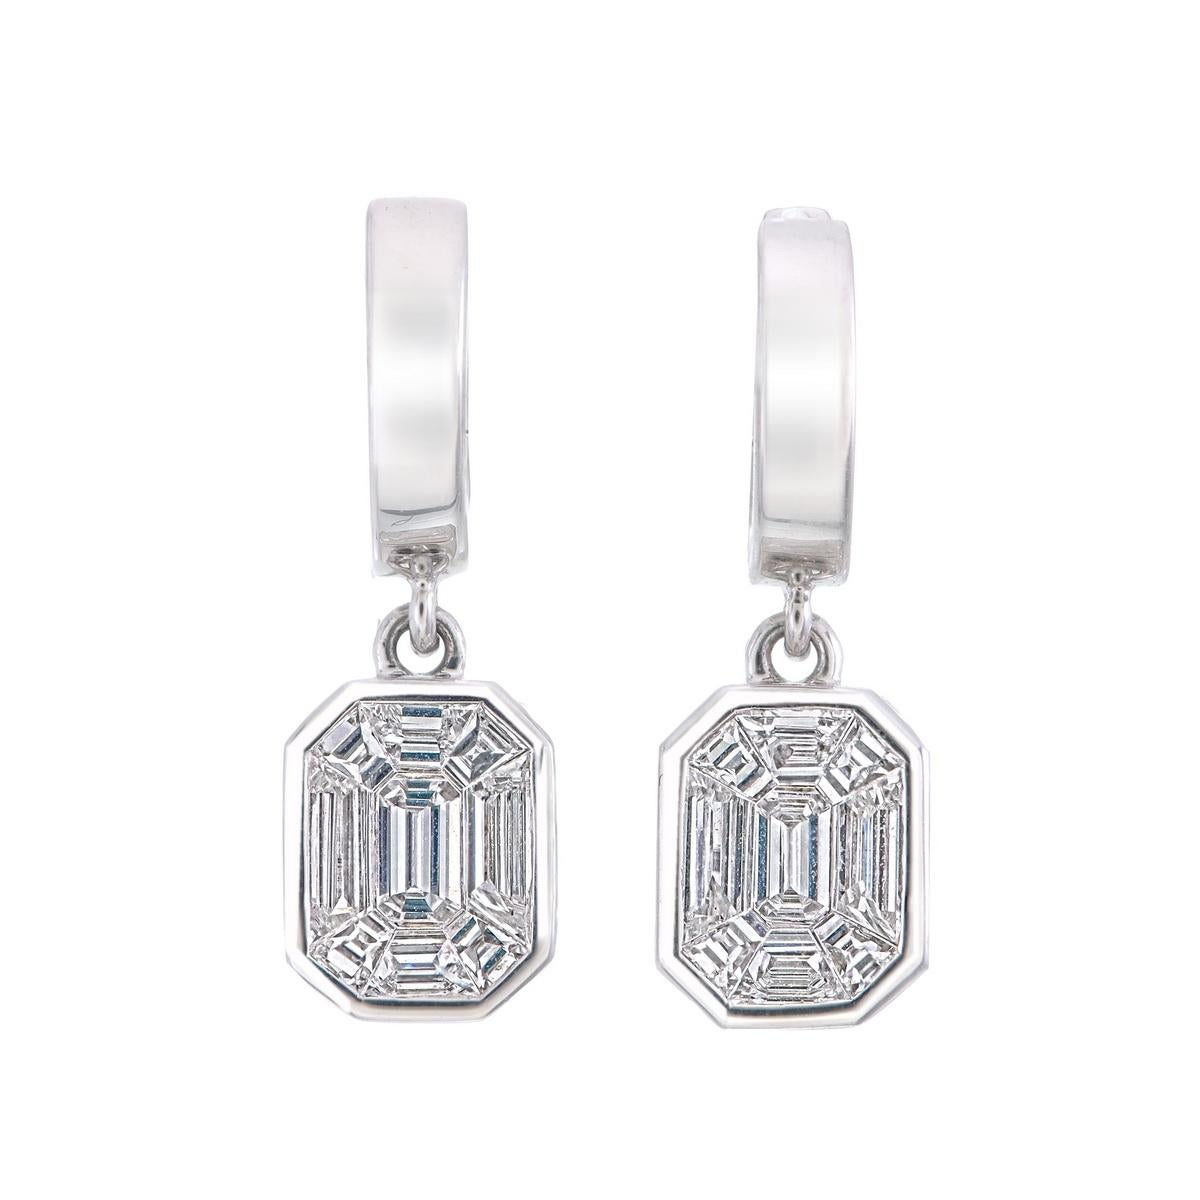 This pair of earrings is made with 1.10 carat diamonds in composite setting giving a look of 4 carat pair.
Extremely light on ears & the gold ring is 8 mm with 2 mm thick
4 carat pair of emerald cut diamonds are worth over  10 times the price but